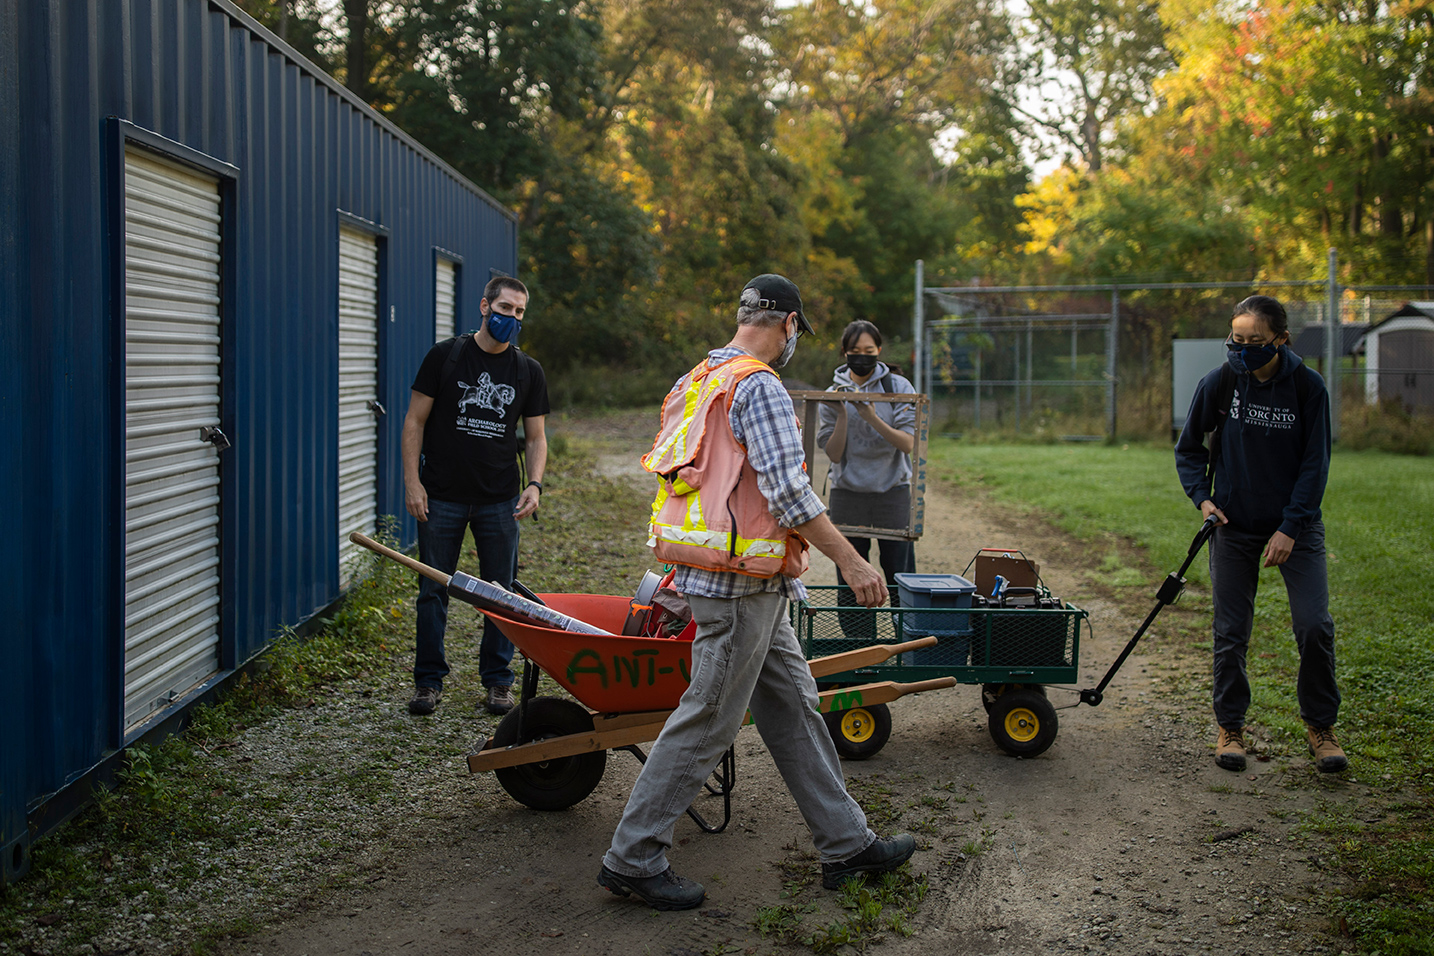 Students towing a wheelbarrow and carrying equipment